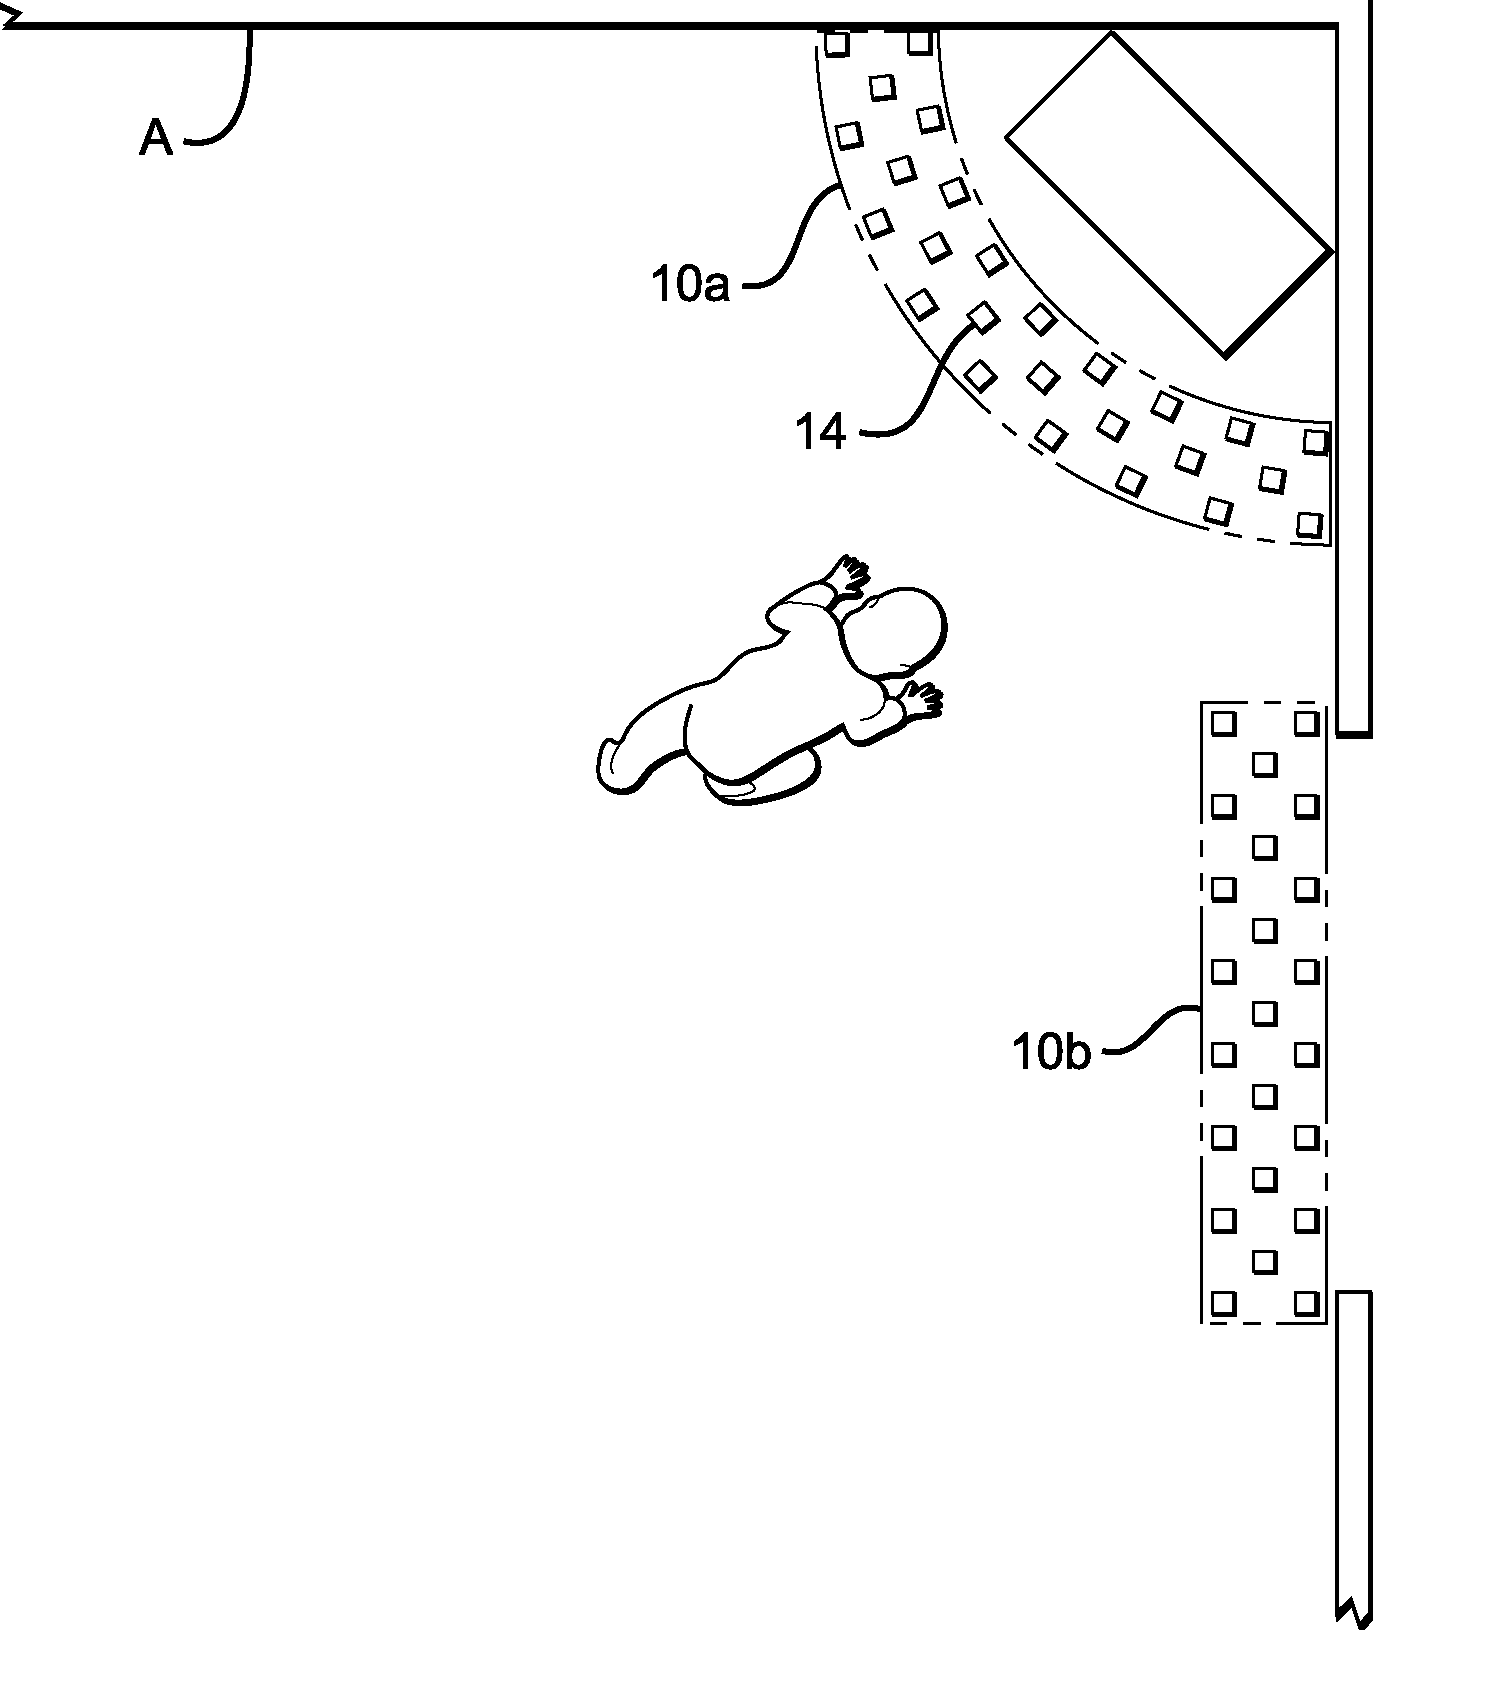 Method for limiting the movement of an infant in a particular direction